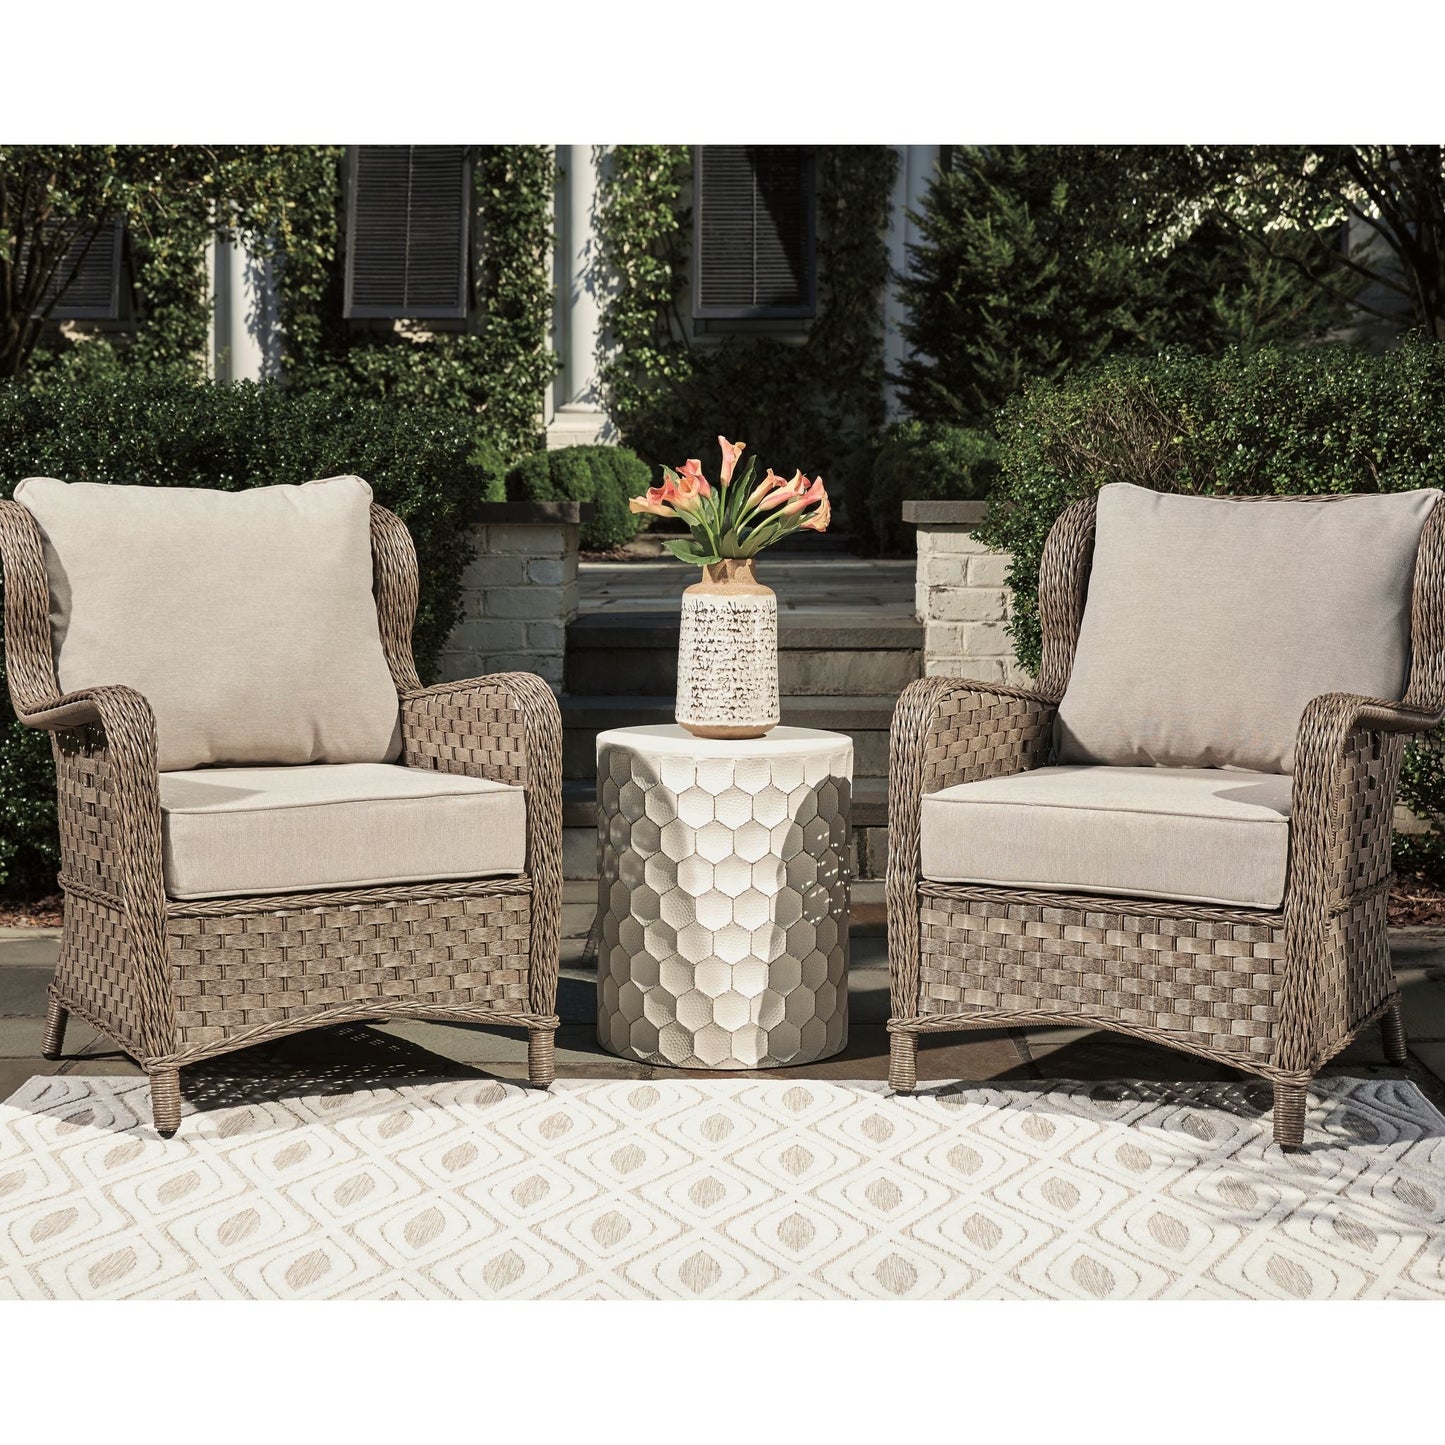 Outdoor Clear Ridge Lounge Chair-Set of 2 Light Brown